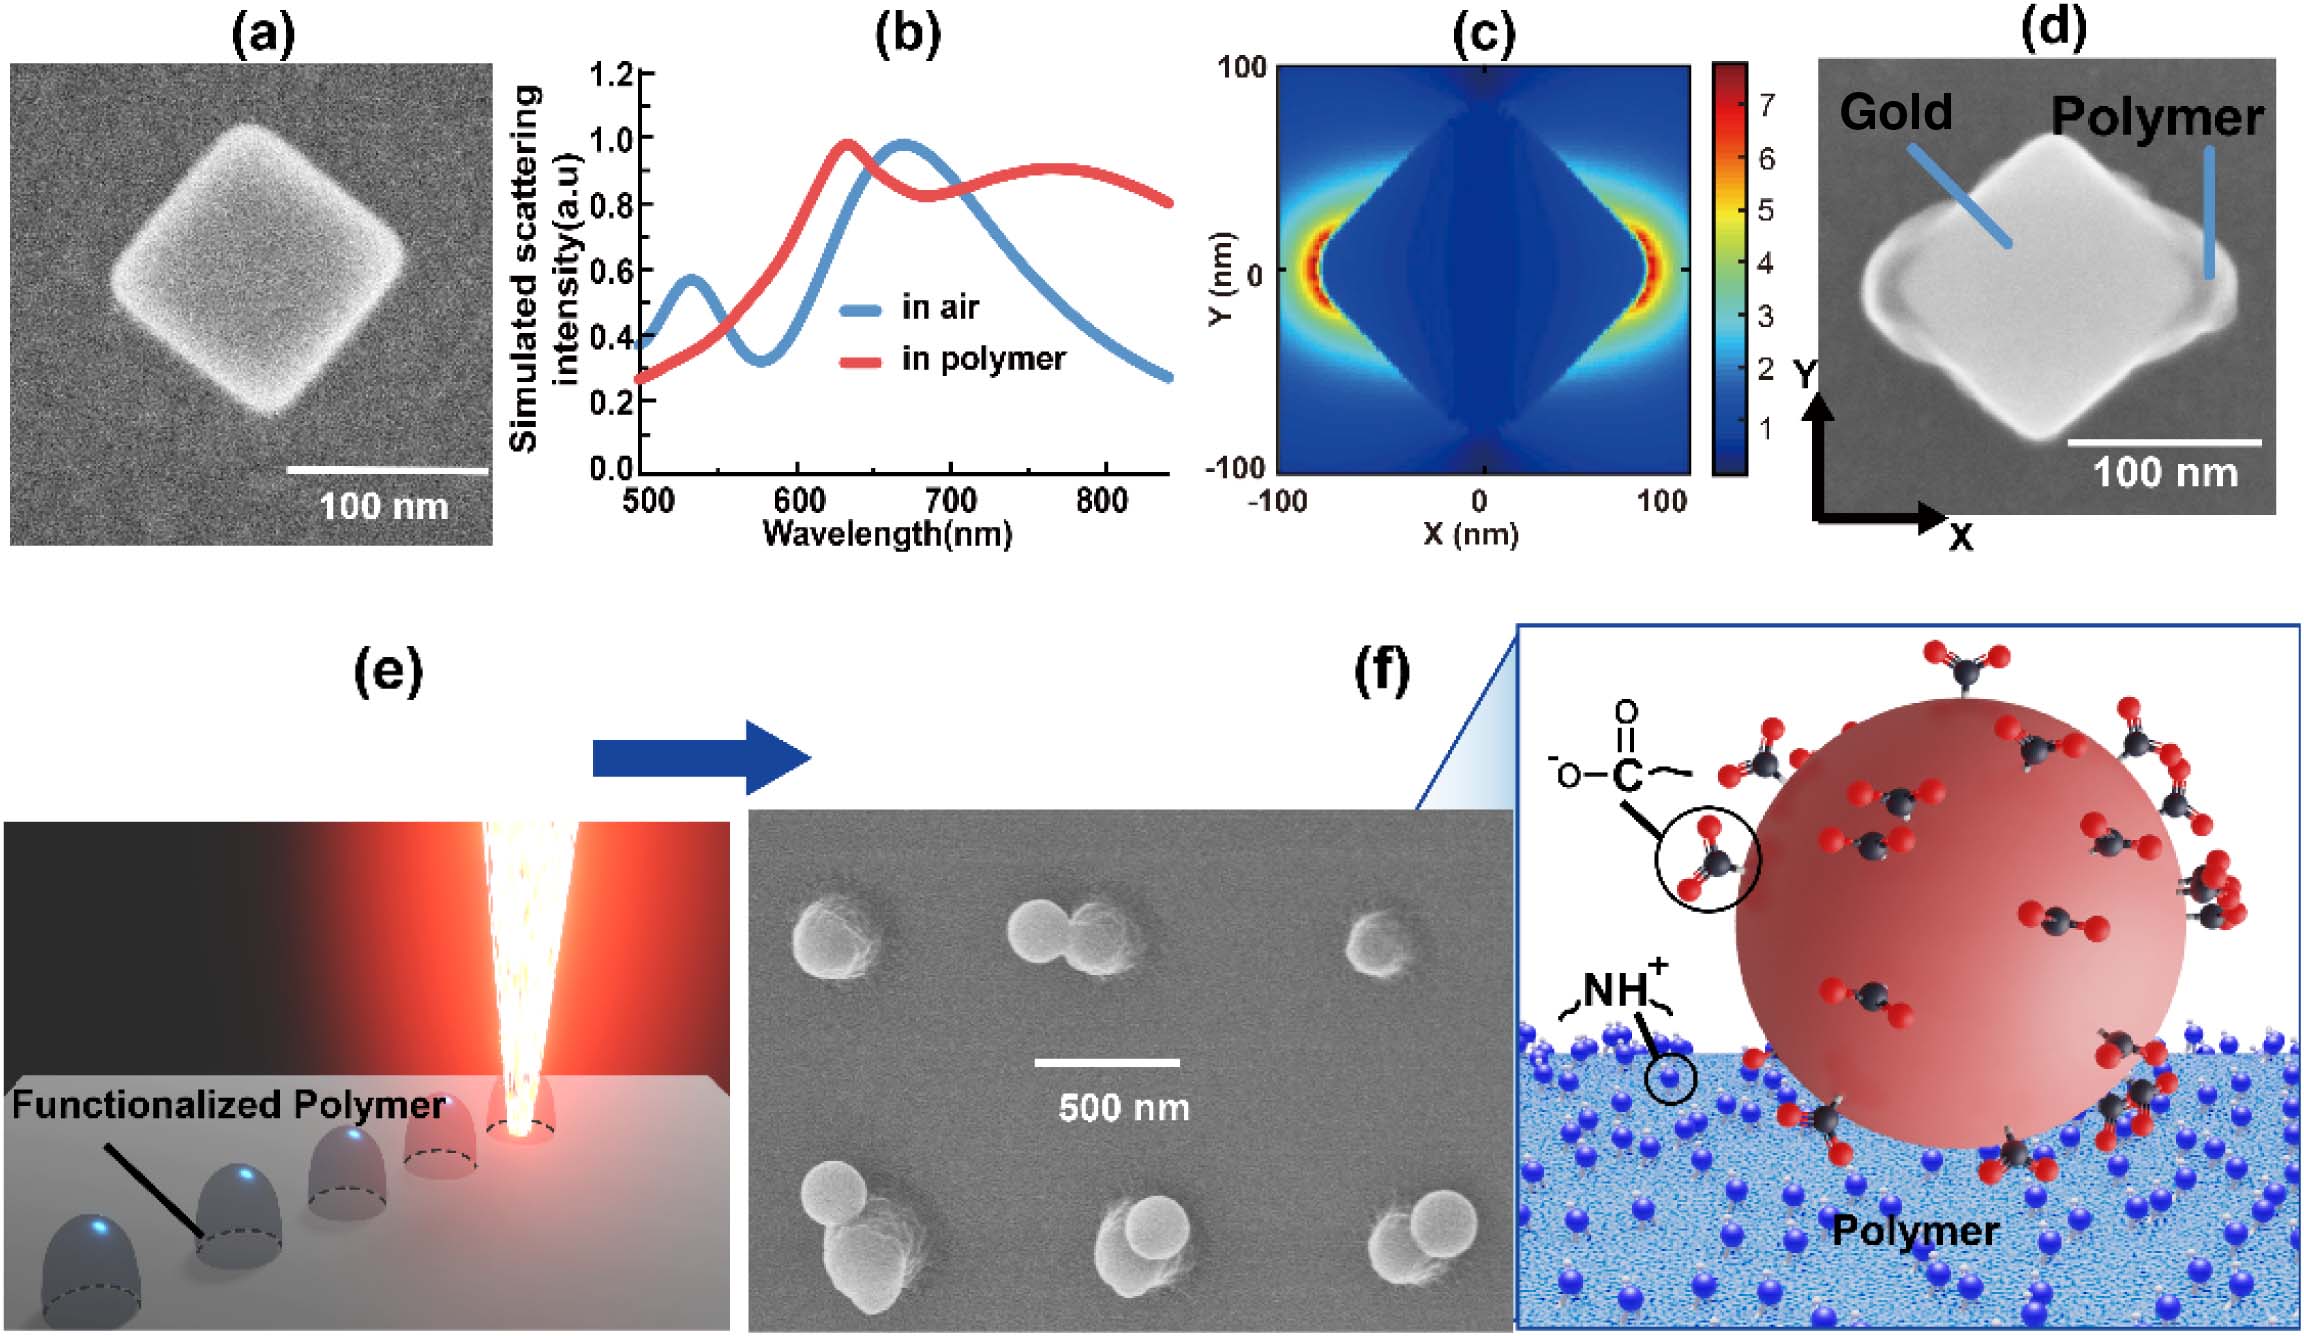 GNC, nanoscale photopolymerization, and surface functionalization. (a) SEM image of a representative single GNC. (b) Calculated scattering spectrum of a single GNC of 125 nm, in air or photopolymer medium (refractive index=1.48), on ITO-coated glass substrate (40 nm thickness of ITO layer with refractive index of 2). (c) FDTD map (at the middle sectional plane of the cube, λ=780 nm) of the field modulus in the vicinity of the GNC illuminated with an X-polarized plane wave. (d) SEM image of the hybrid nanostructure resulting from two-photon polymerization (TPP) triggered by the field shown in (c). (e) Illustration of the photopolymerization of mixture of PETA monomer functionalized by amine. (f) Left: SEM image of polymerized dots whose surface contains amine group. After immersion in a solution of negatively charged functionalized fluorescent doped polystyrene spheres (200 nm diameter), the fluorescent spheres attached on four of the six polymer dots by electrostatic interaction. Right: schematic representation of the electrostatic interaction. NH+ represents the positively charged protonated amine group.